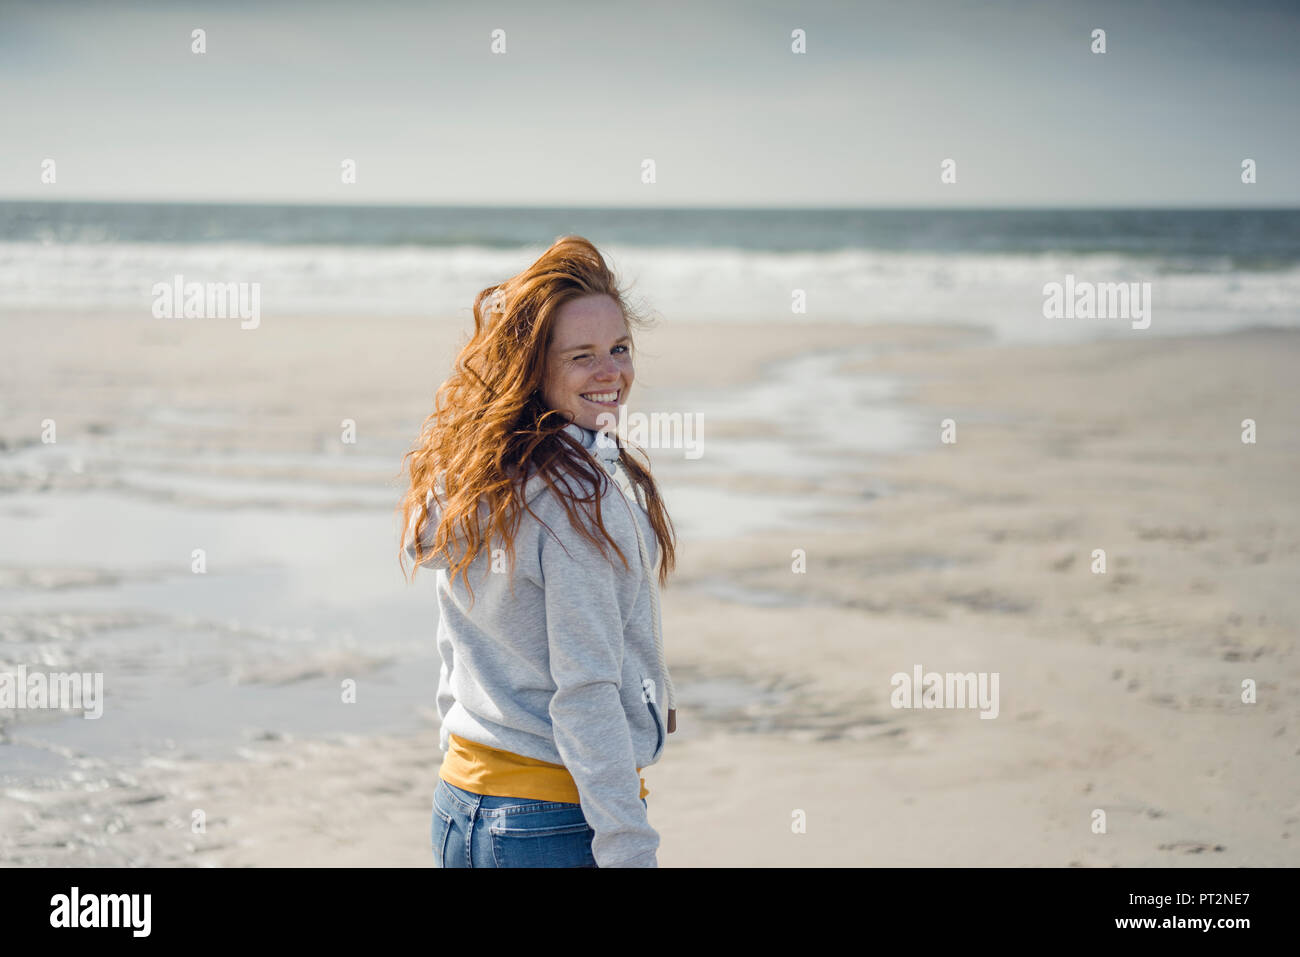 Redheaded woman relaxing on the beach, laughing Stock Photo